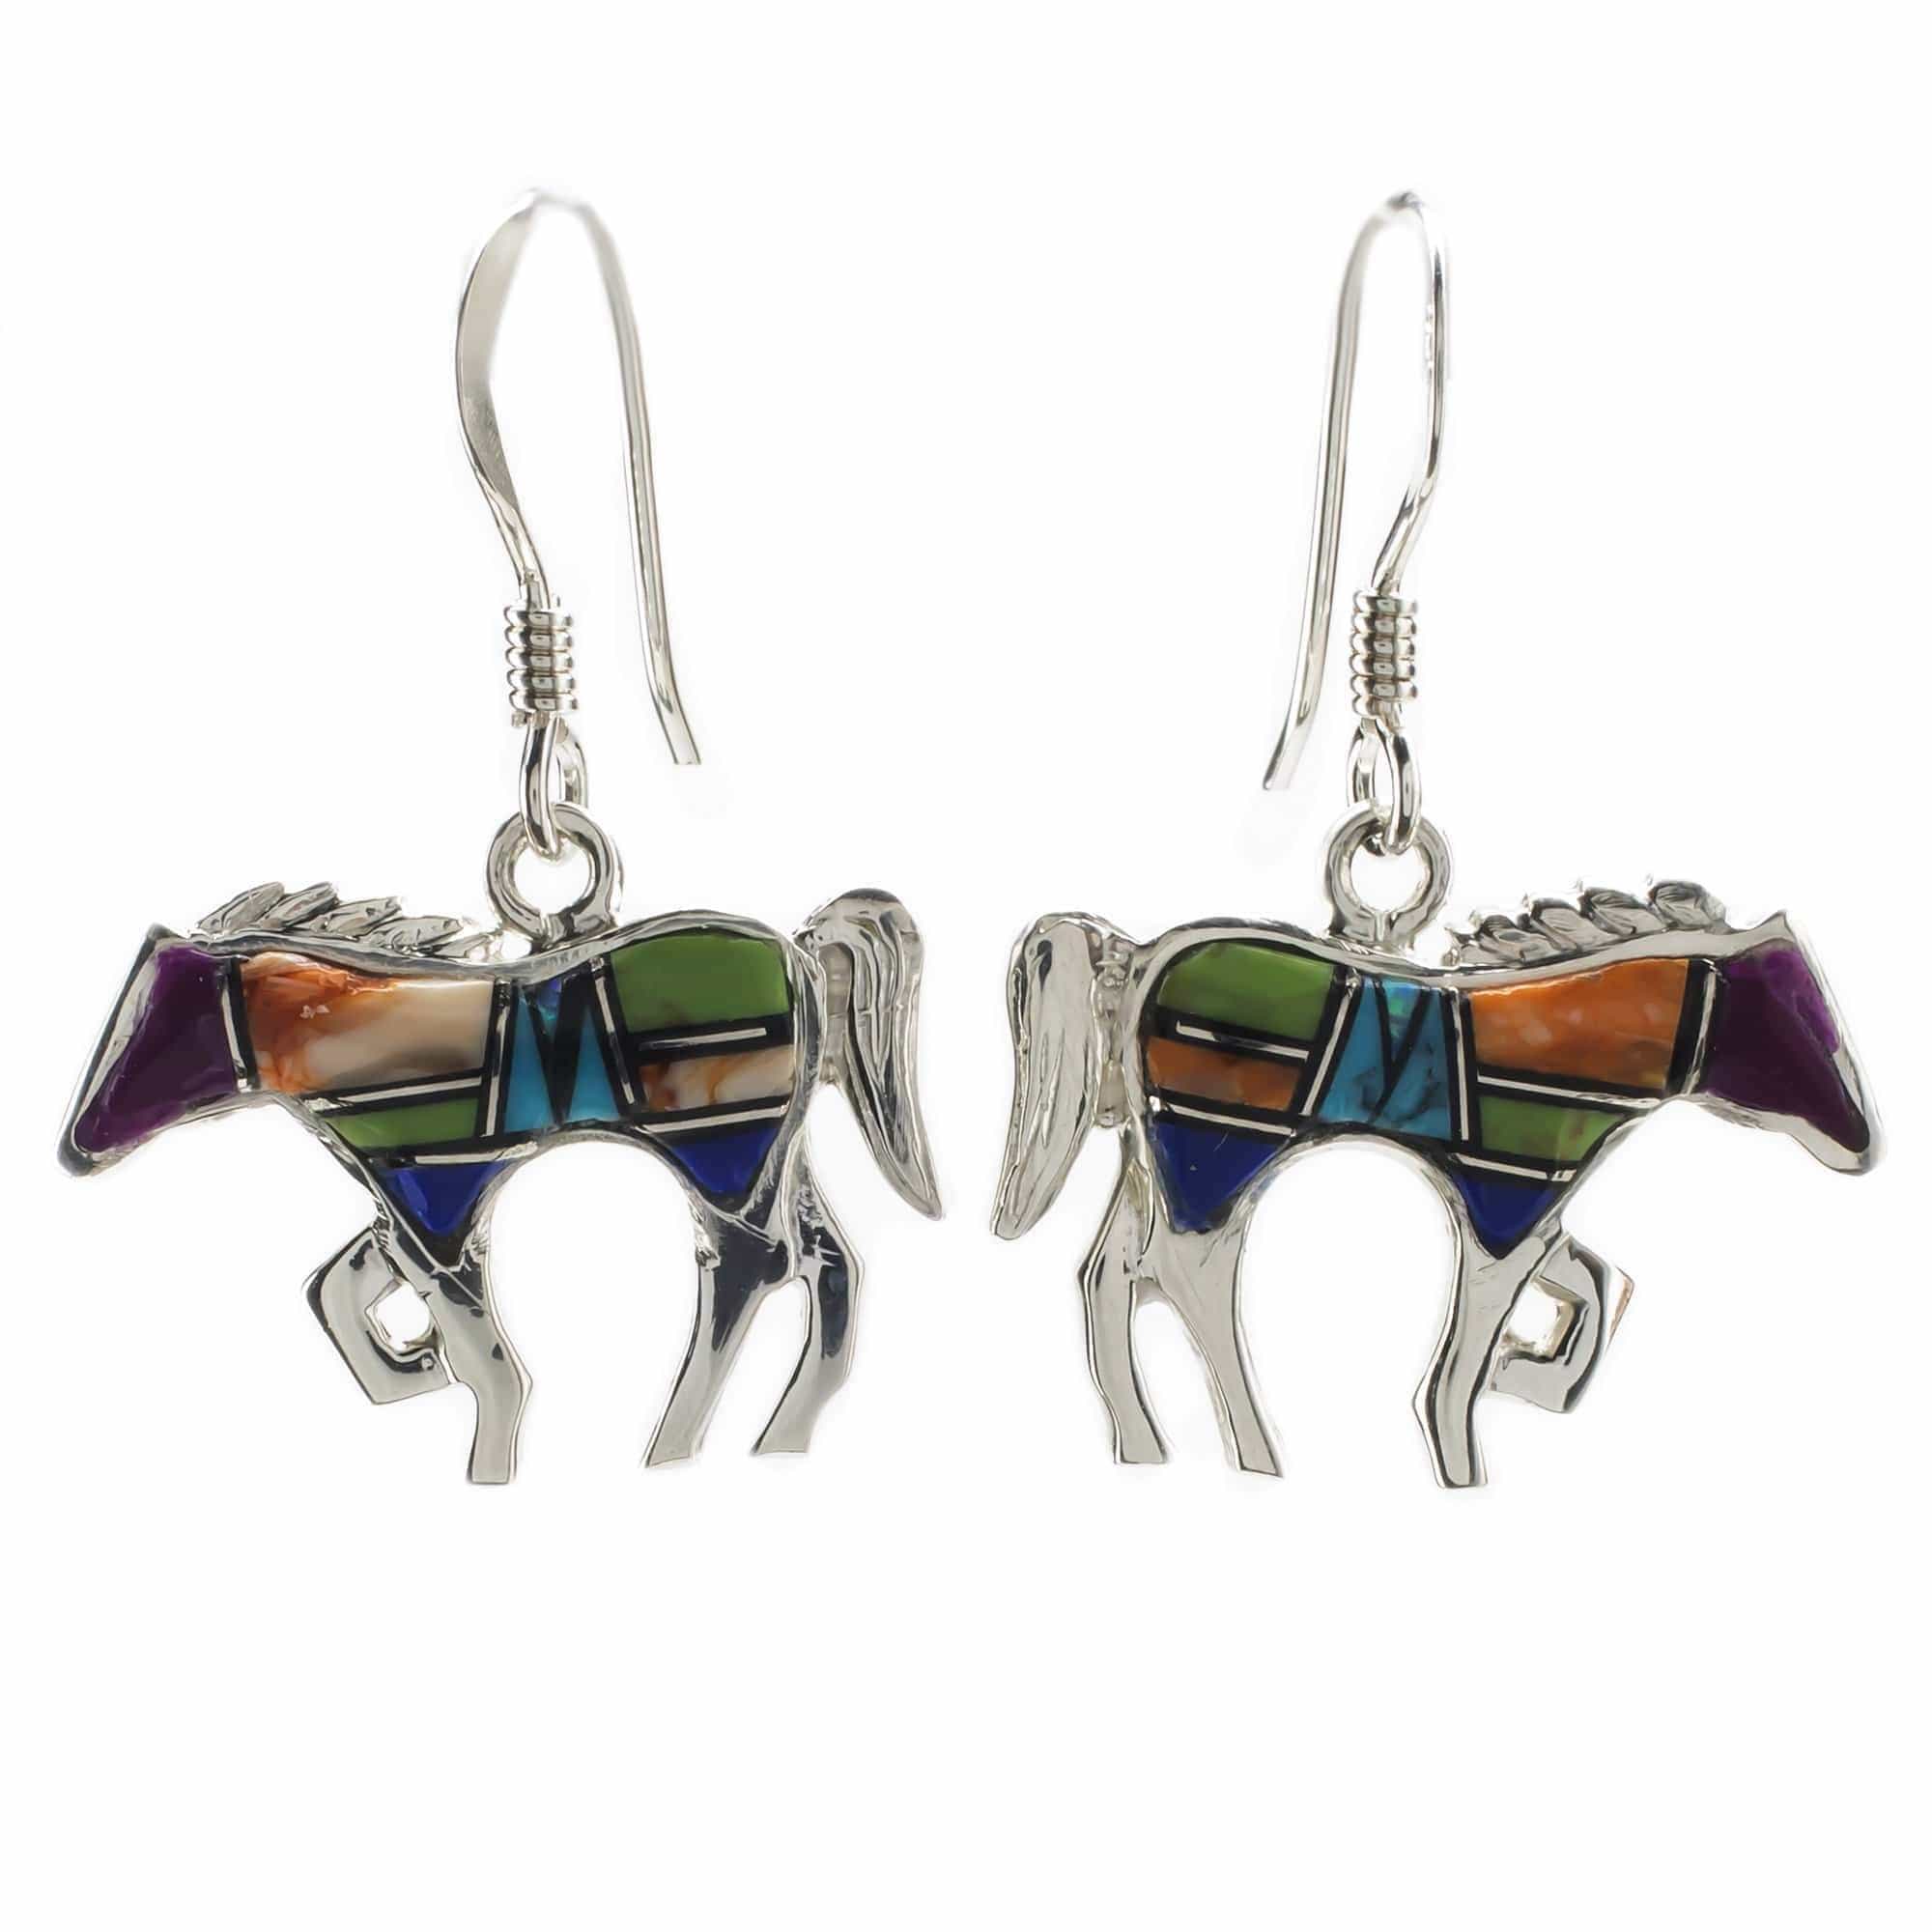 Kalifano Southwest Silver Jewelry Multi Gemstone Horse 925 Sterling Silver Earring with French Hook USA Handmade NME.1089.MT